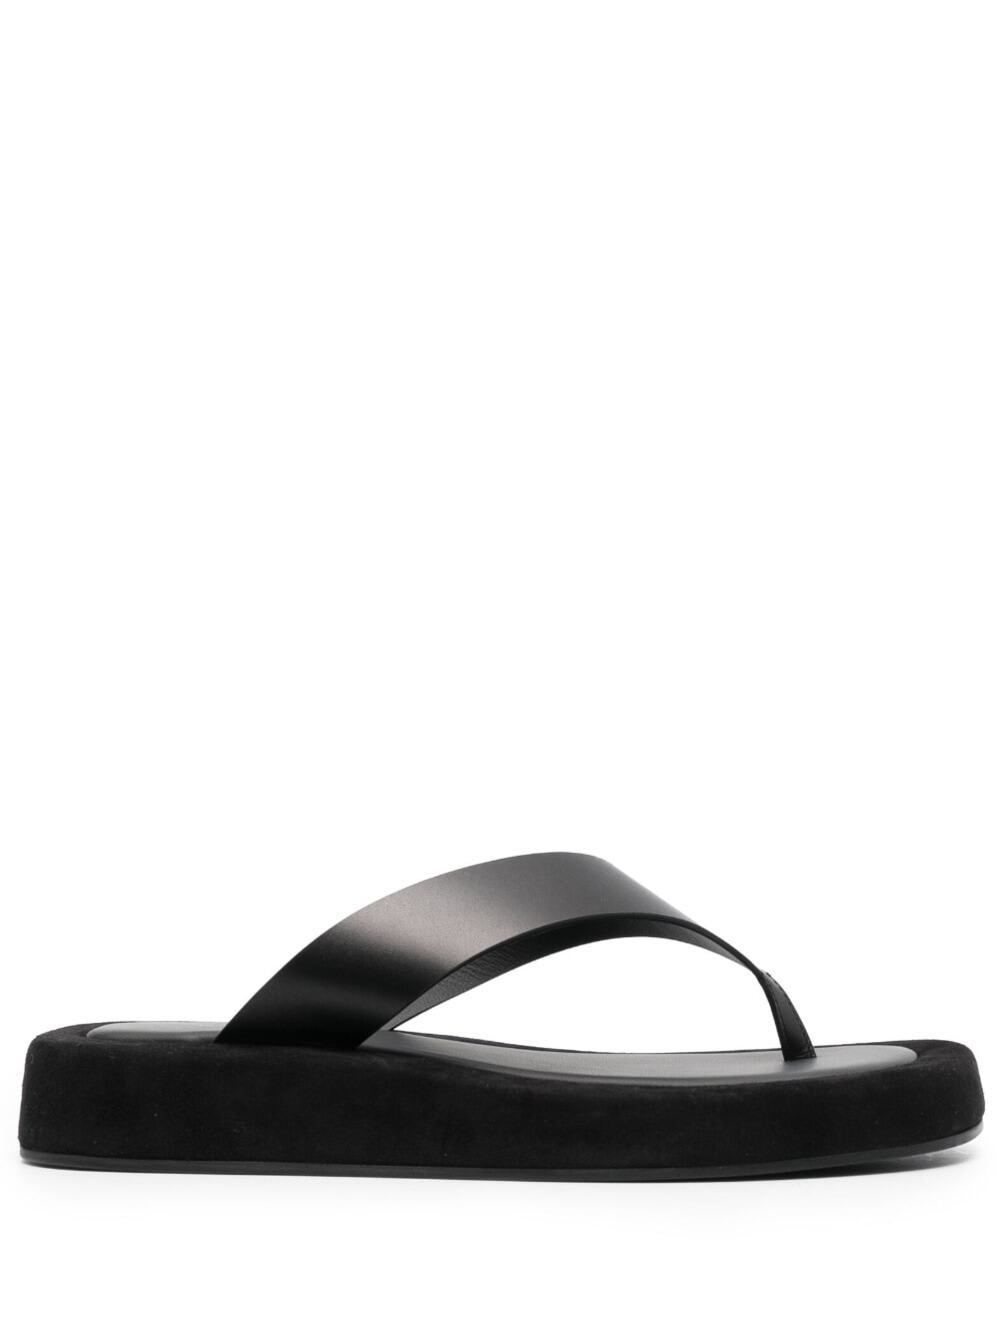 THE ROW GINZA BLACK SANDALS WITH PLATFORM IN LEATHER WOMAN